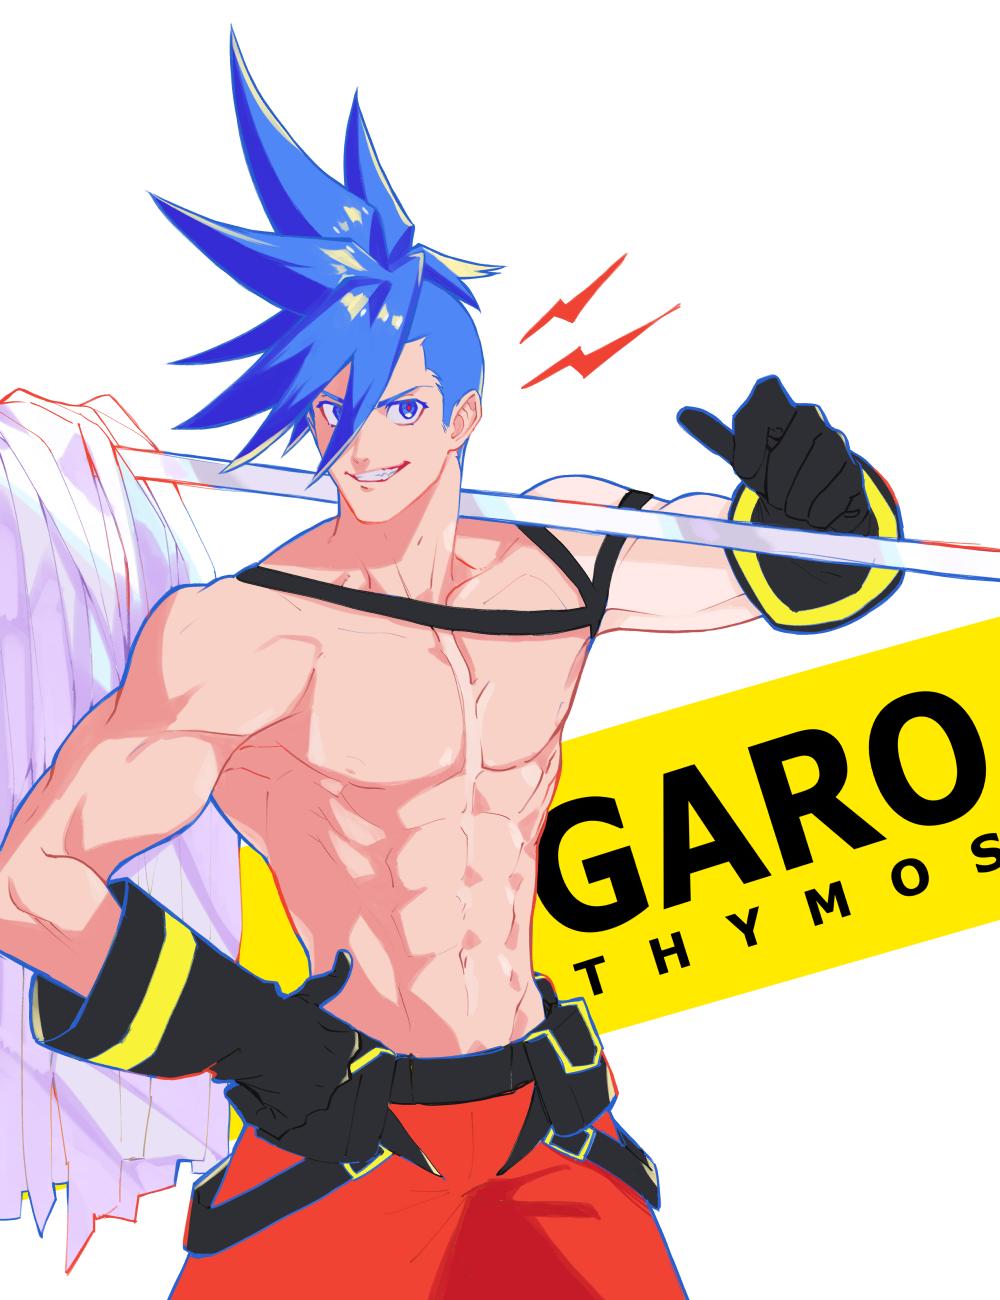 1boy blue_eyes blue_hair character_name galo_thymos gloves highres juu_satoshi looking_at_viewer male_focus matoi muscle promare shirtless solo spiky_hair